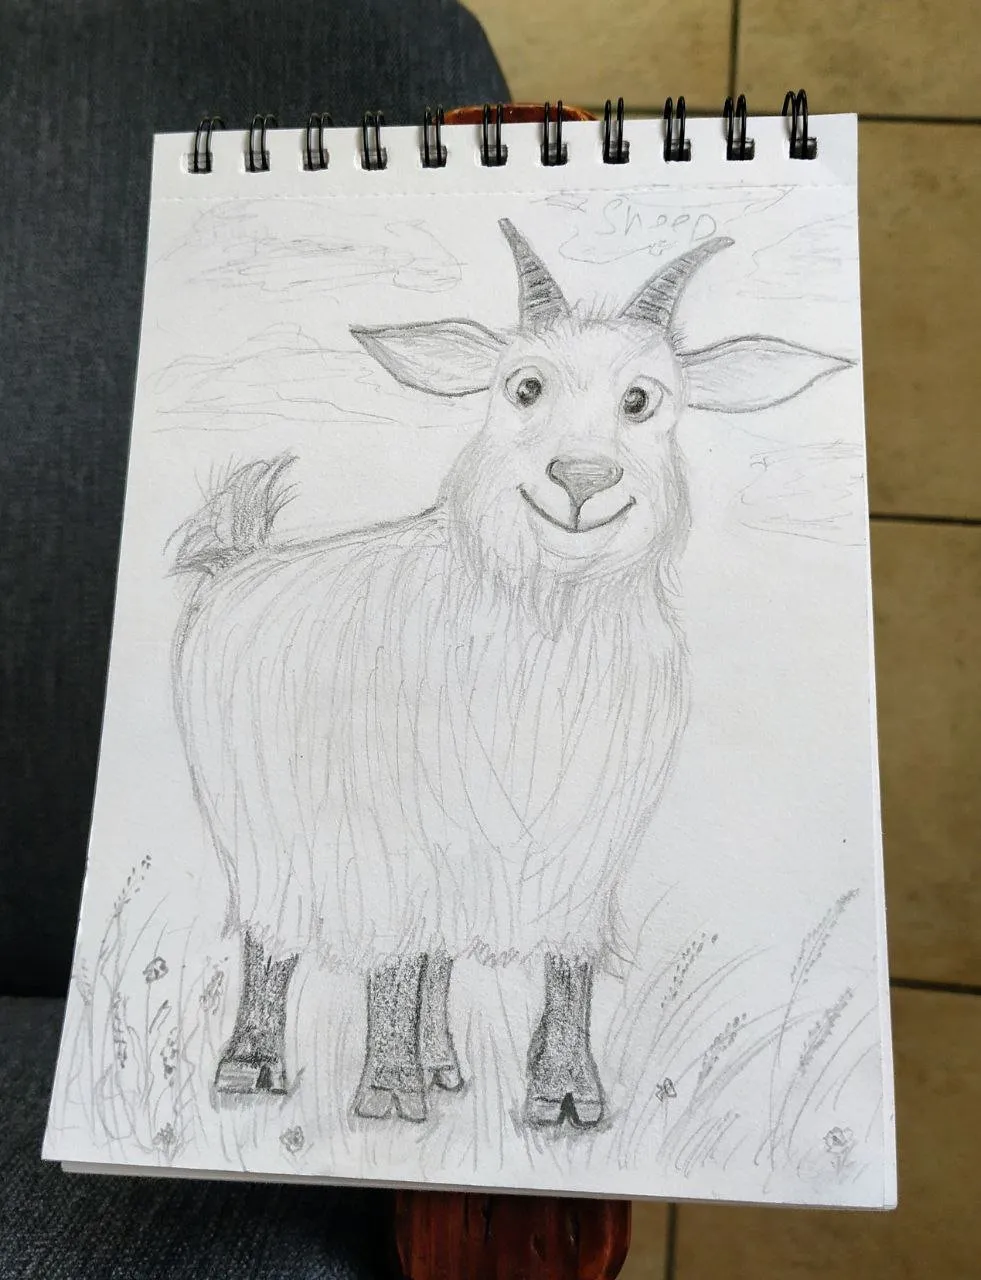 How To Draw Goat Easy - YouTube